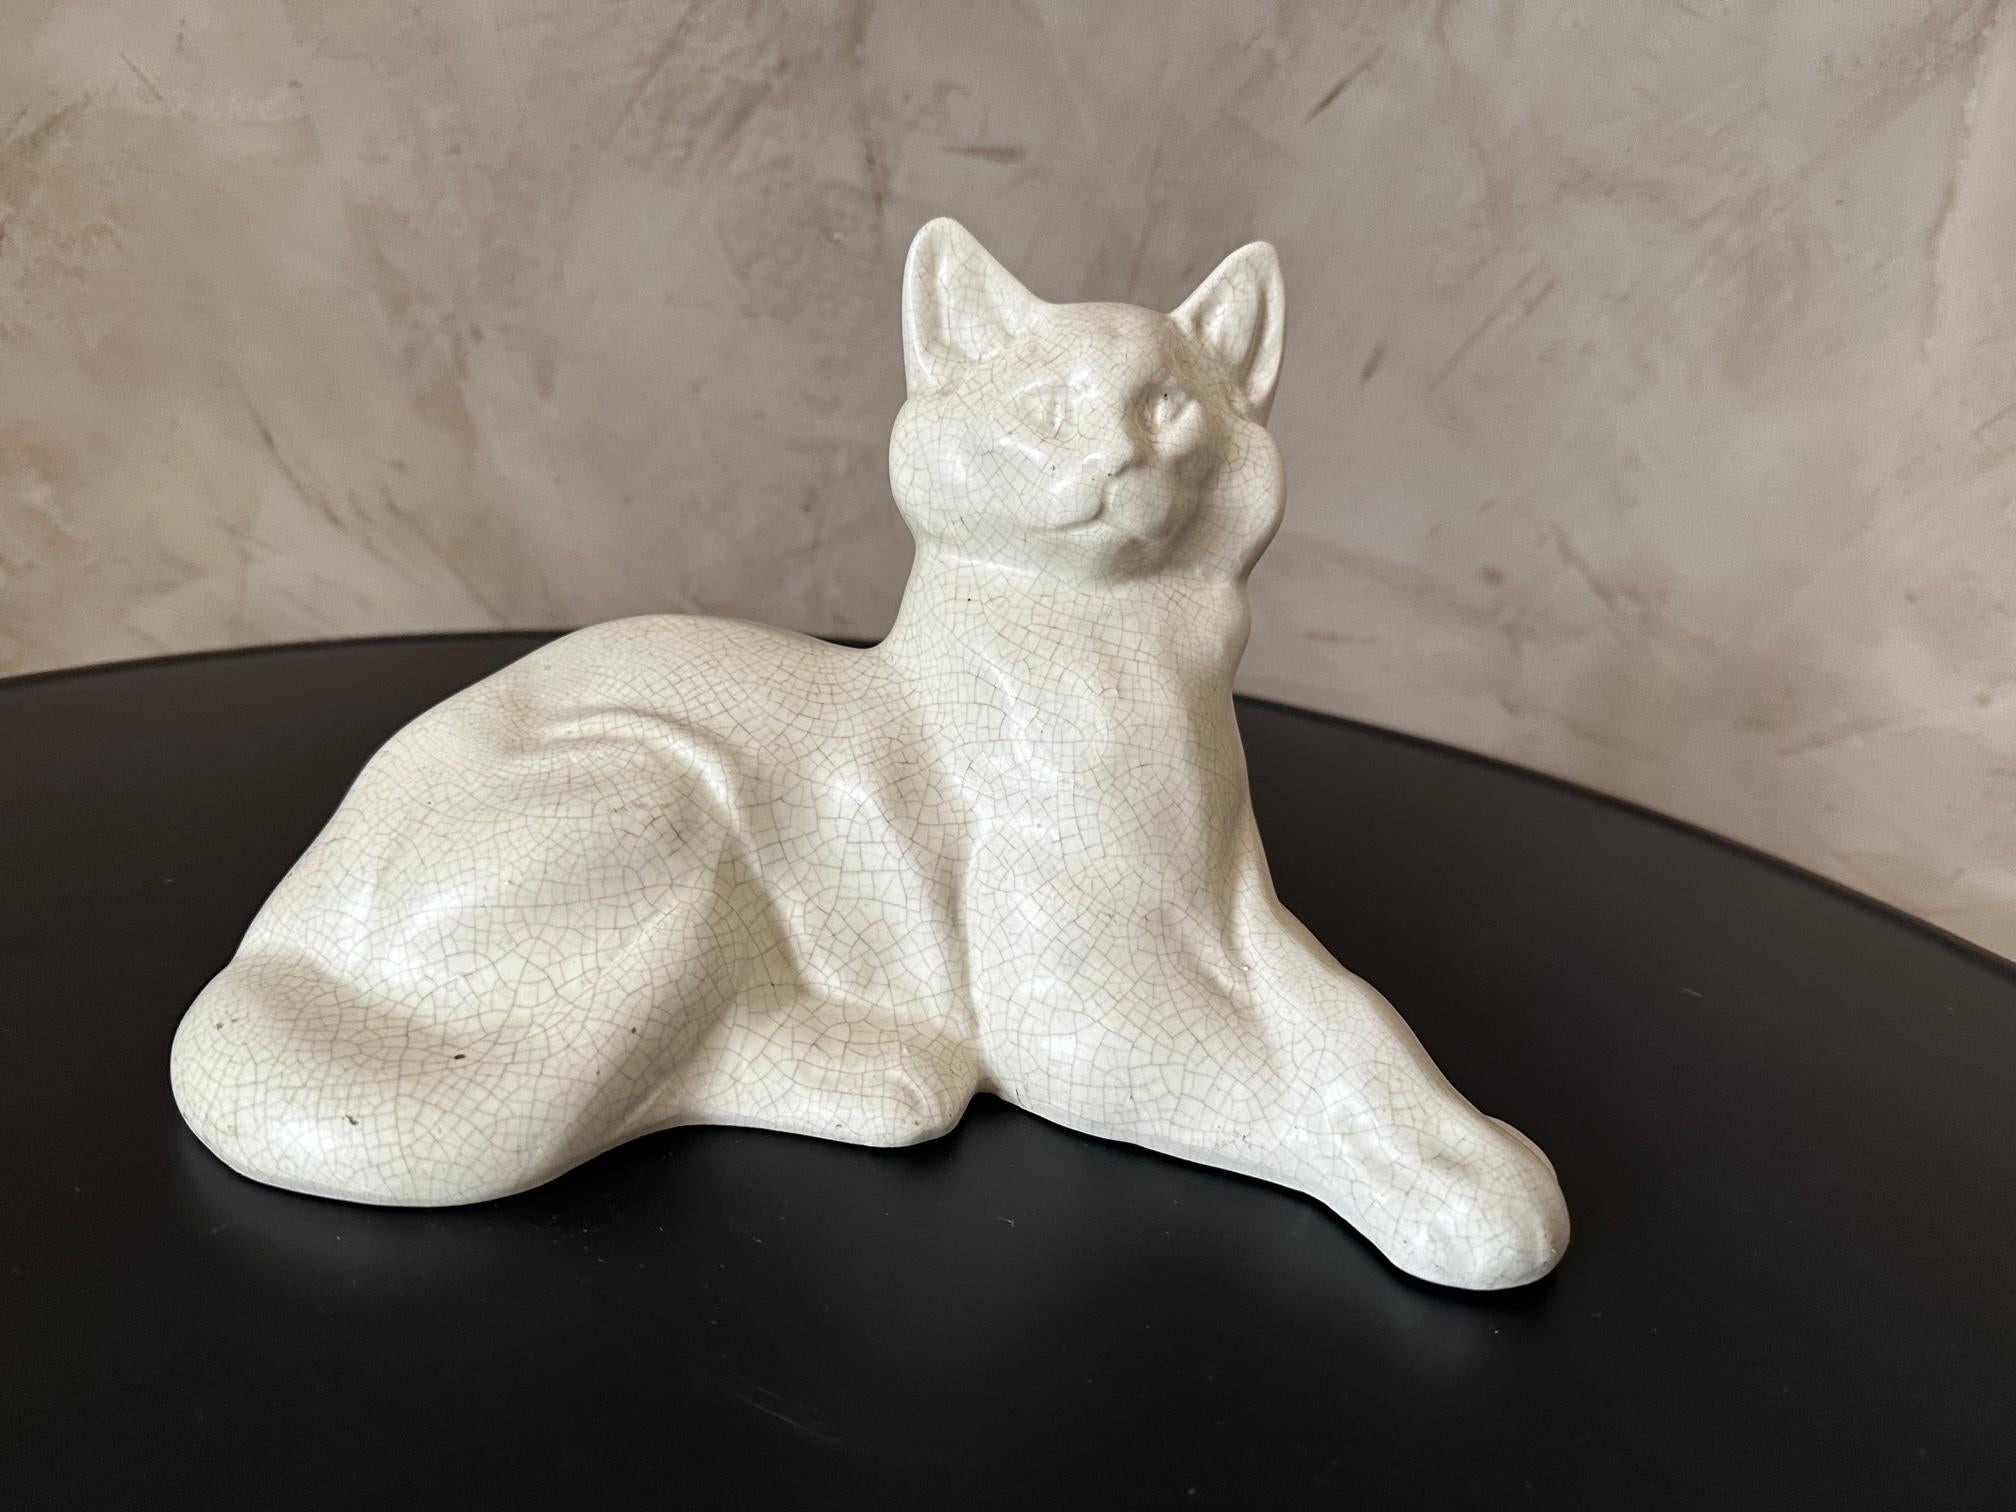 Period art deco kitten in St Clément ceramic signed Dax on the back.
Perfect condition and very good quality.
Rare piece.